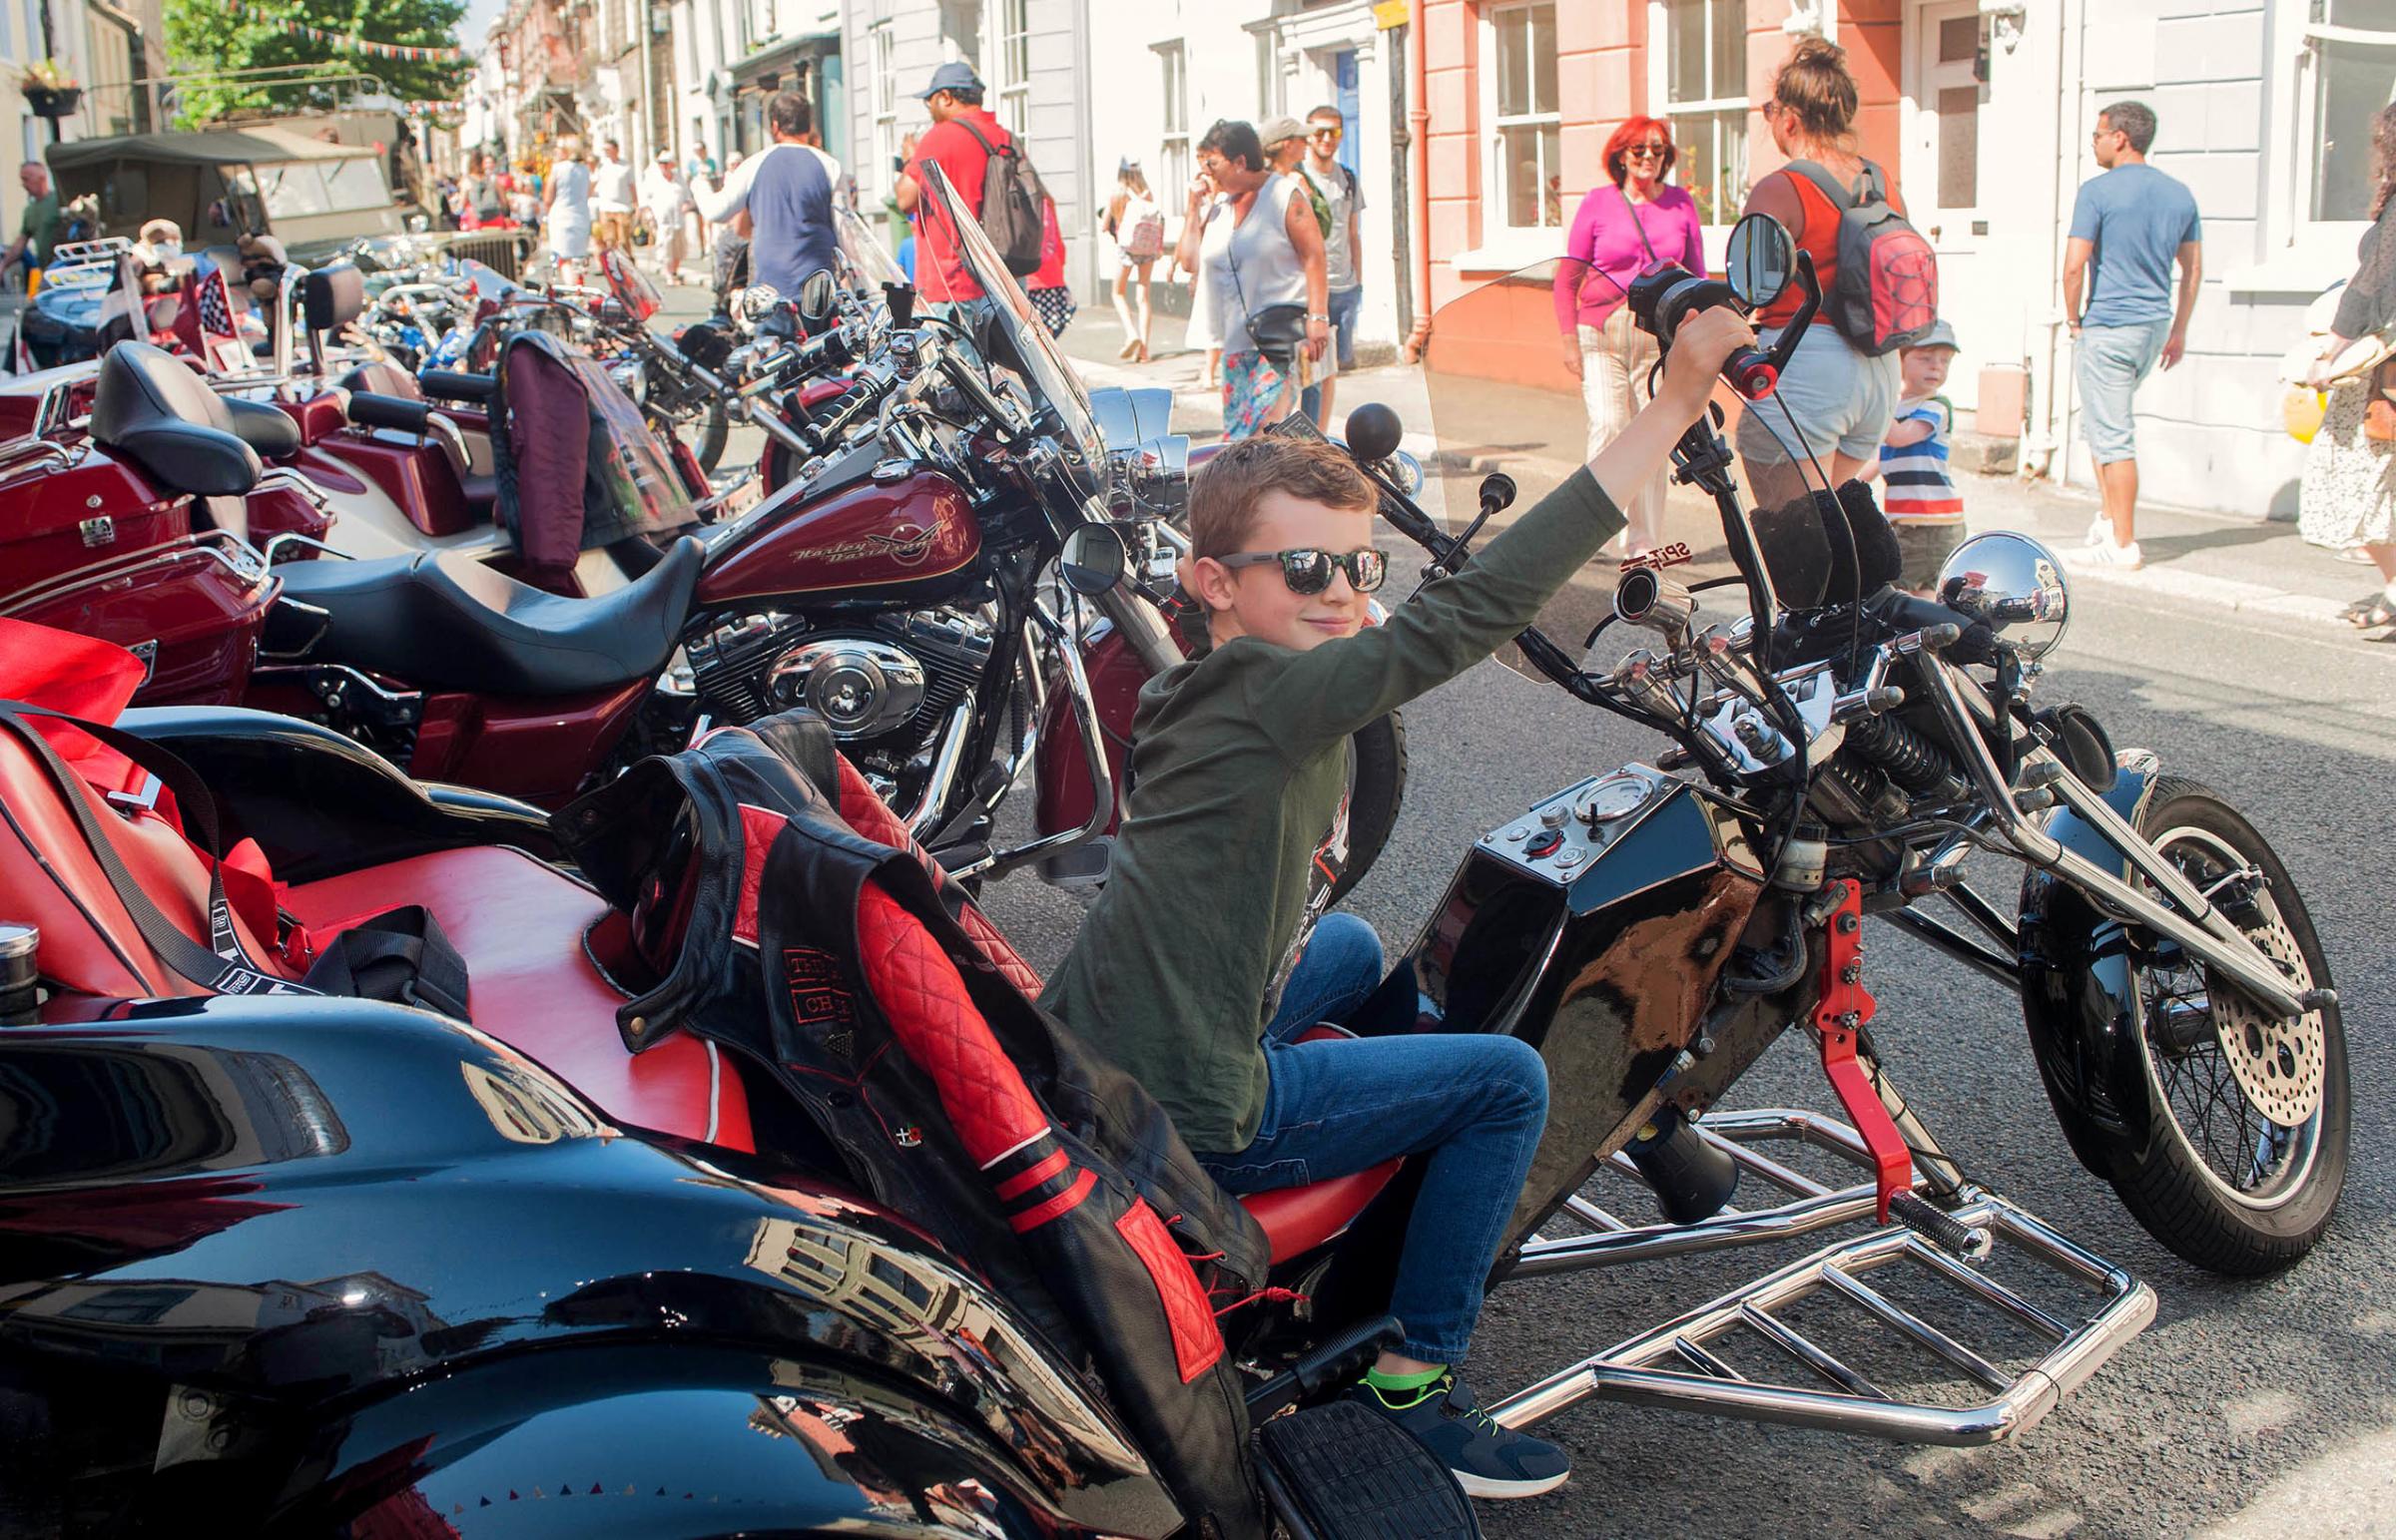 Motorcyles, trikes, vintage cars and military vehicles were on display in Broad Street. Picture by Colin Higgs